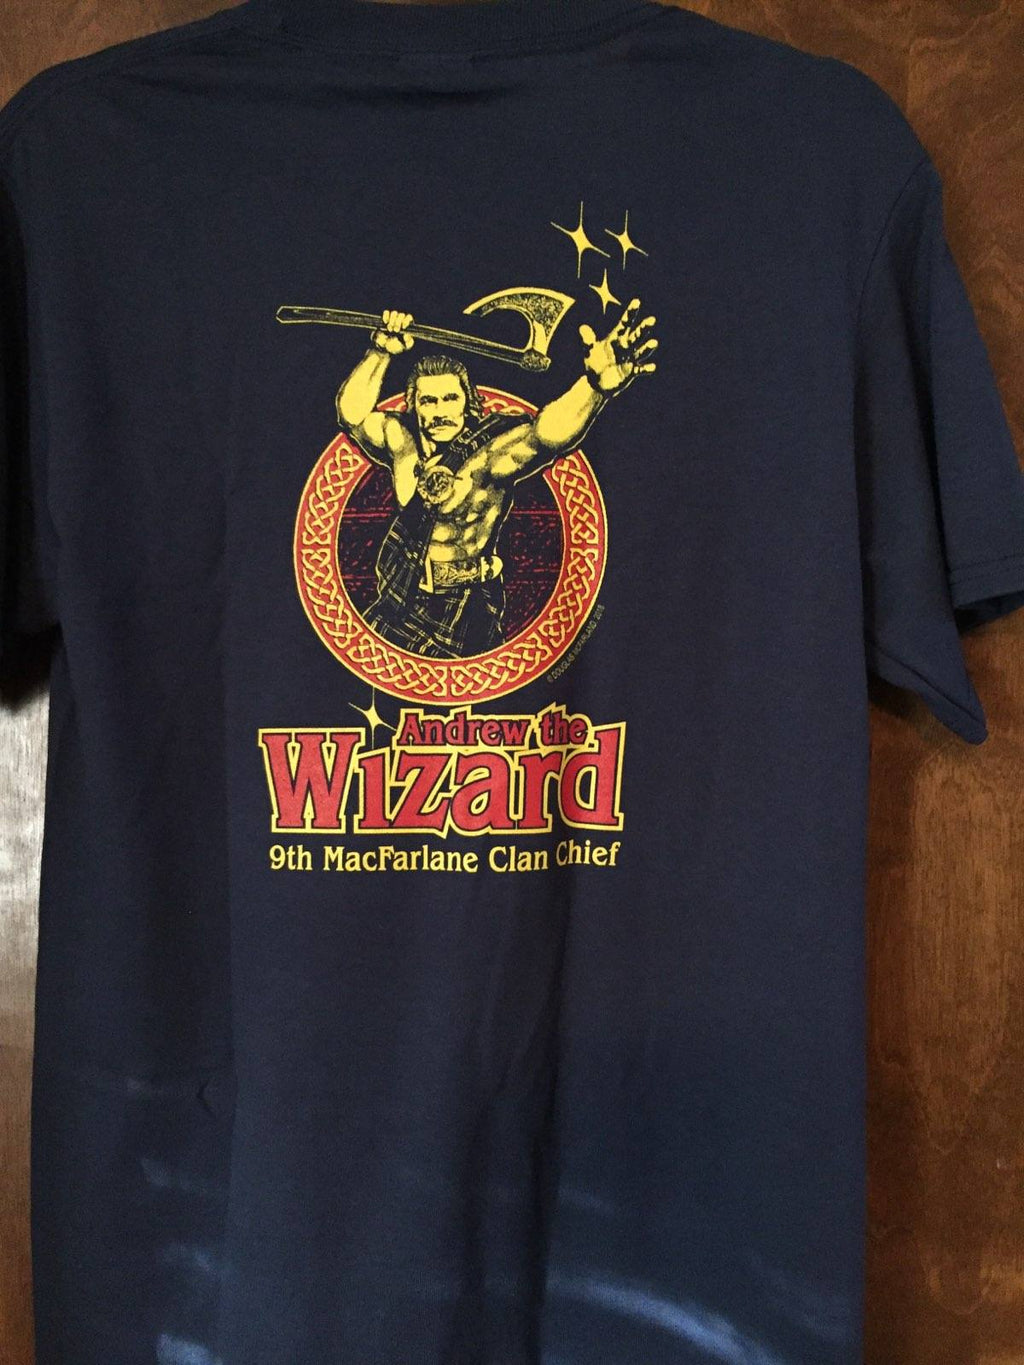 Andrew"the Wizard" - T-Shirt (Size S, M, L, XL, 4XL)